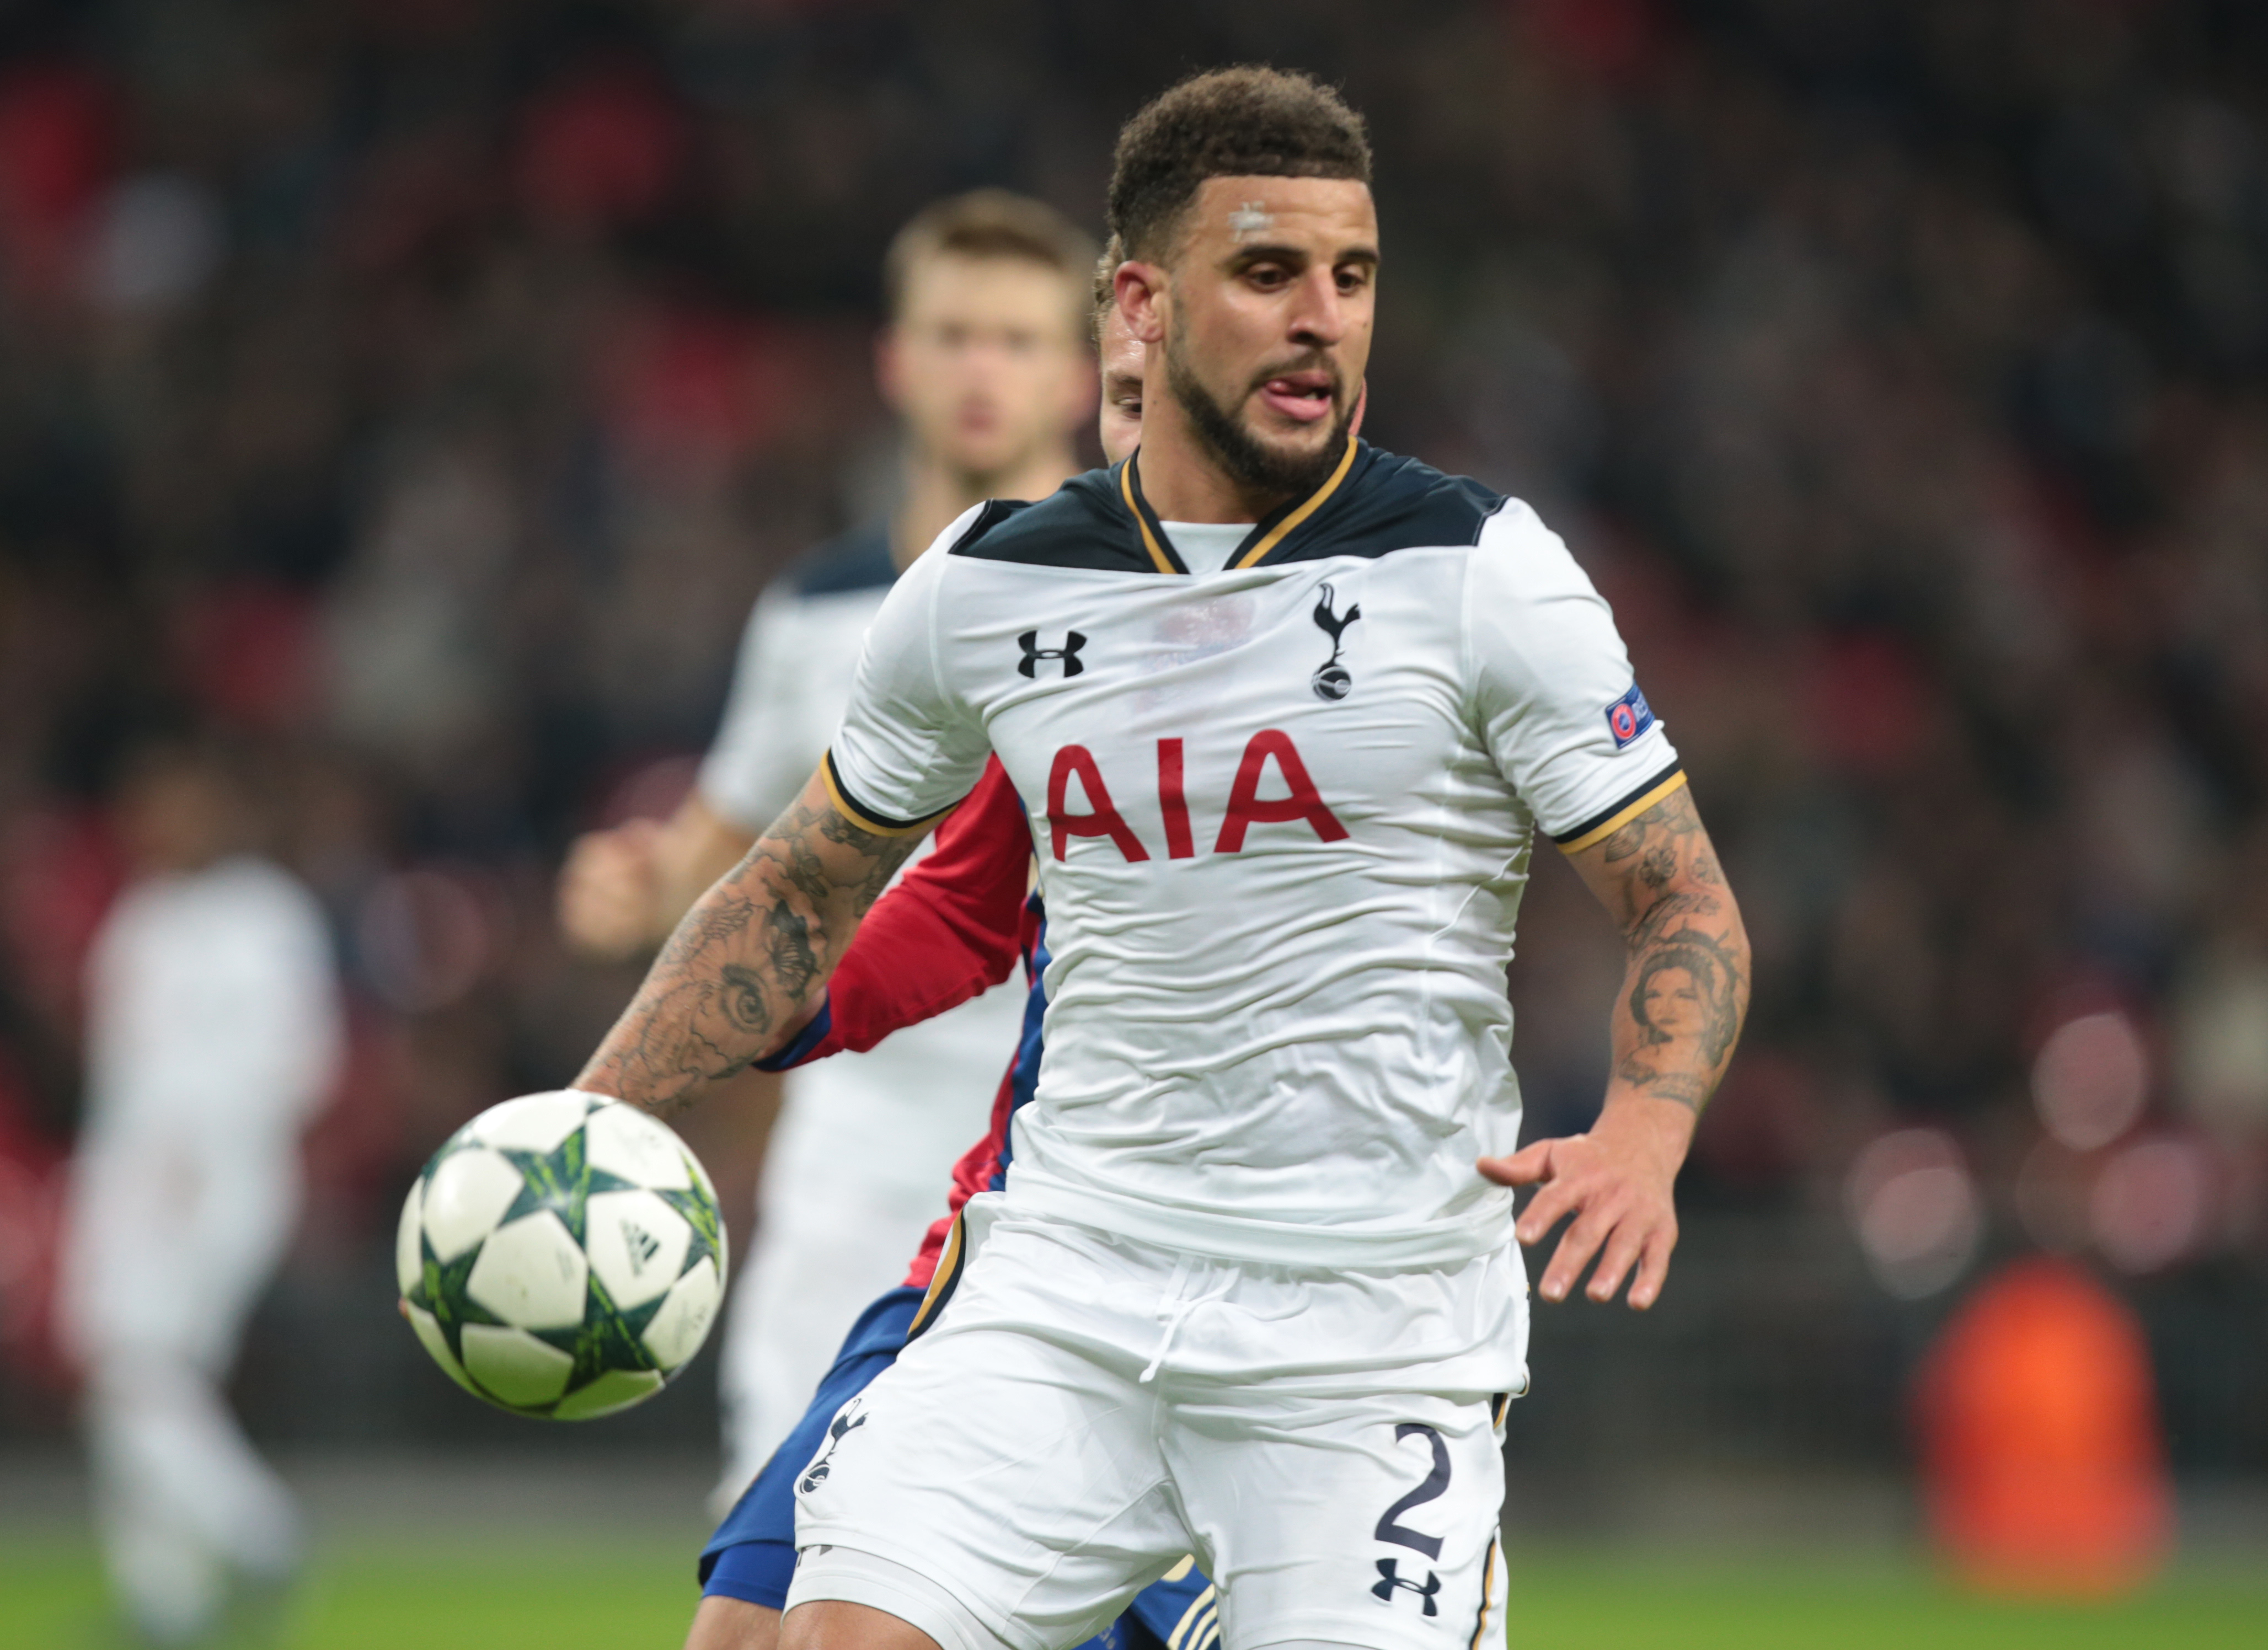 Kyle Walker in action for Tottenham in a Champions League game against CSKA Moscow in 2016.